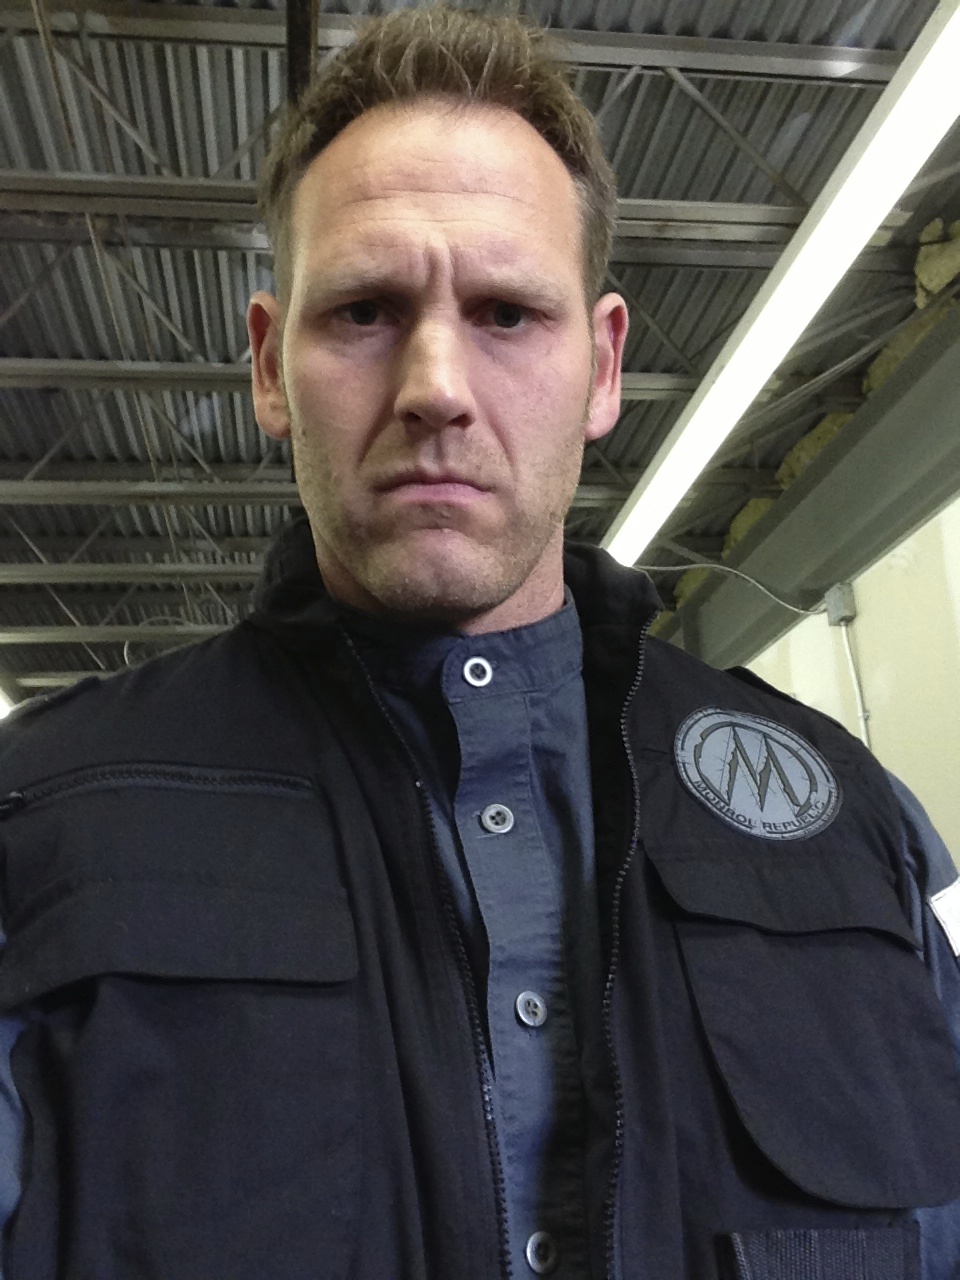 Playing the role of the Enforcer on the TV show Revolution.